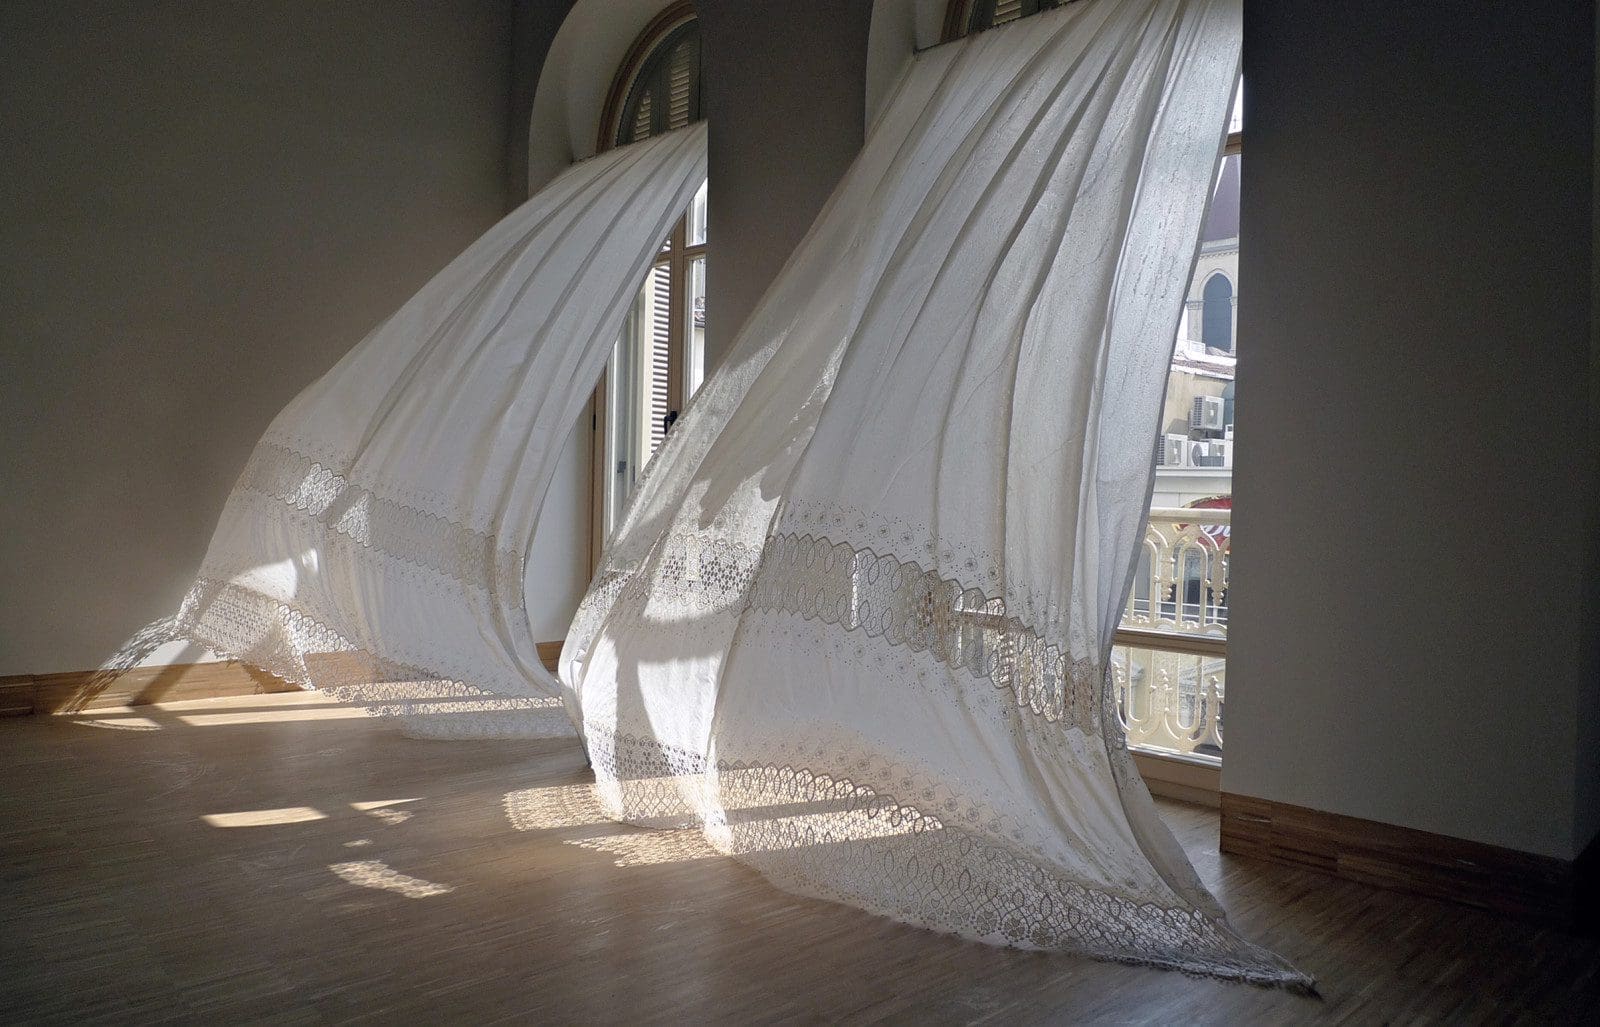 Melancholia in Arcadia, 2011, Lace curtains, textile hardener, Exhibited at: SALT, Istanbul, Turkey, Curated by: Vasif Kortun